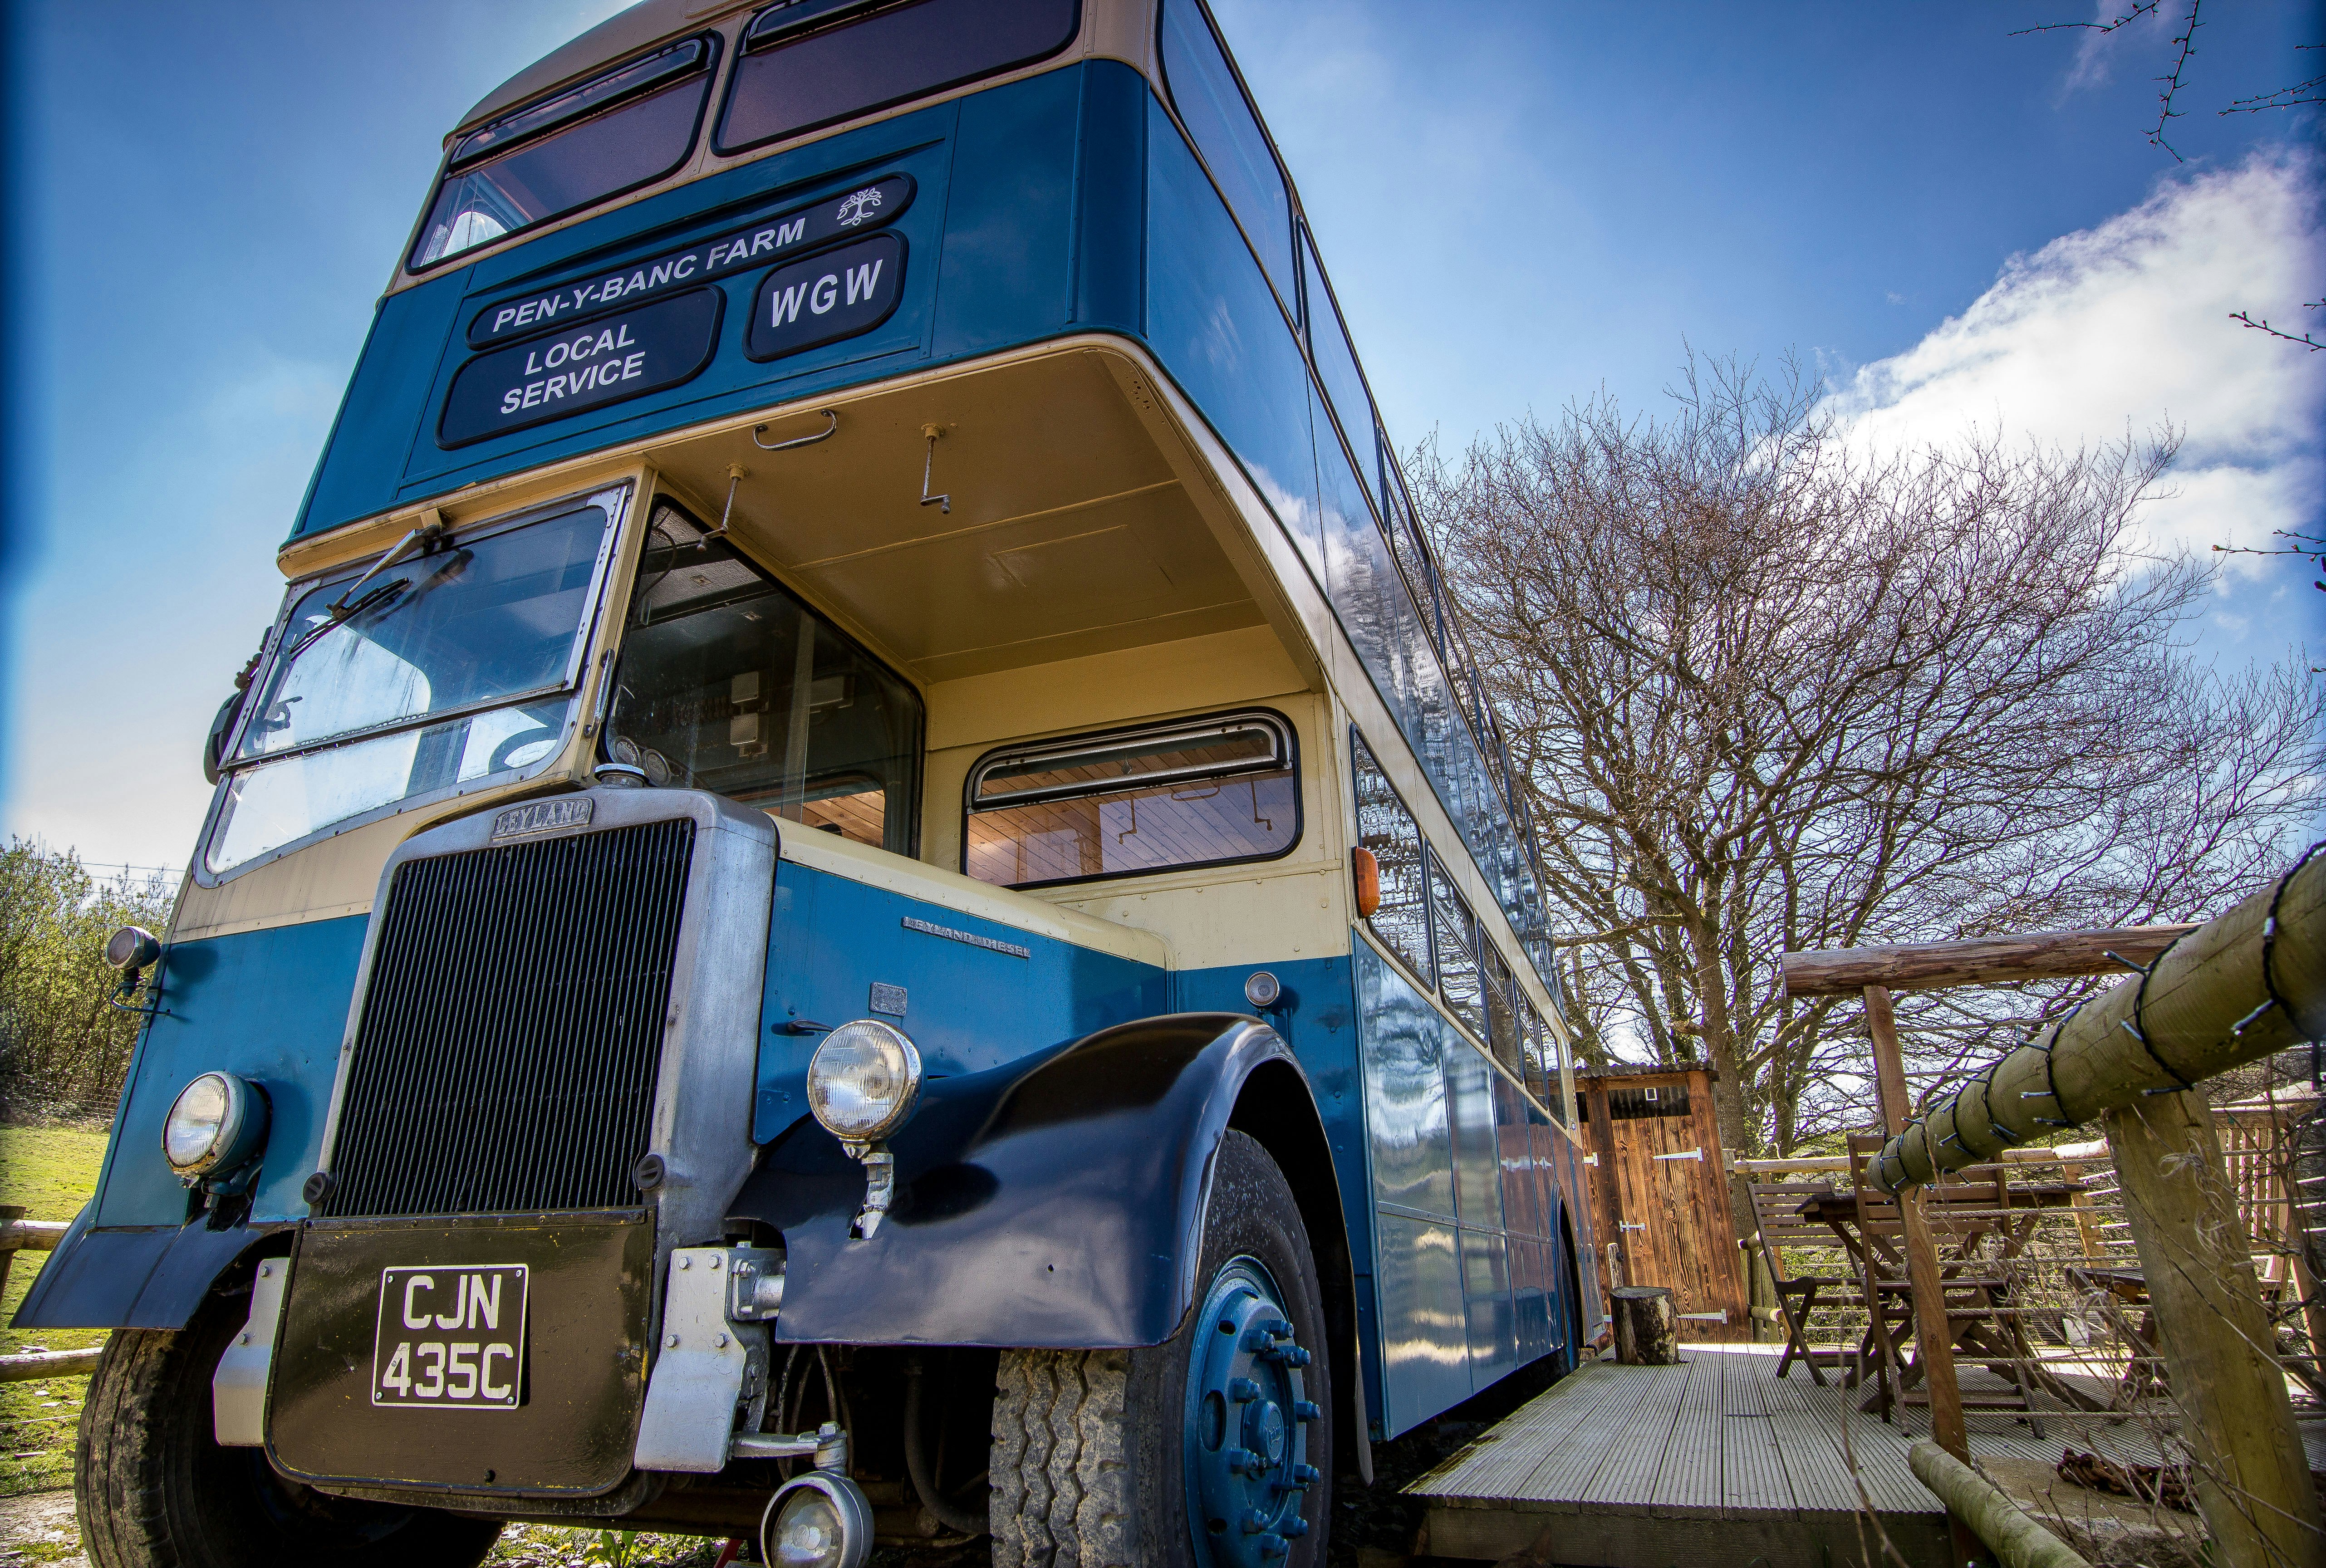 The 1964 Leyland Titan bus © Independent Cottages 